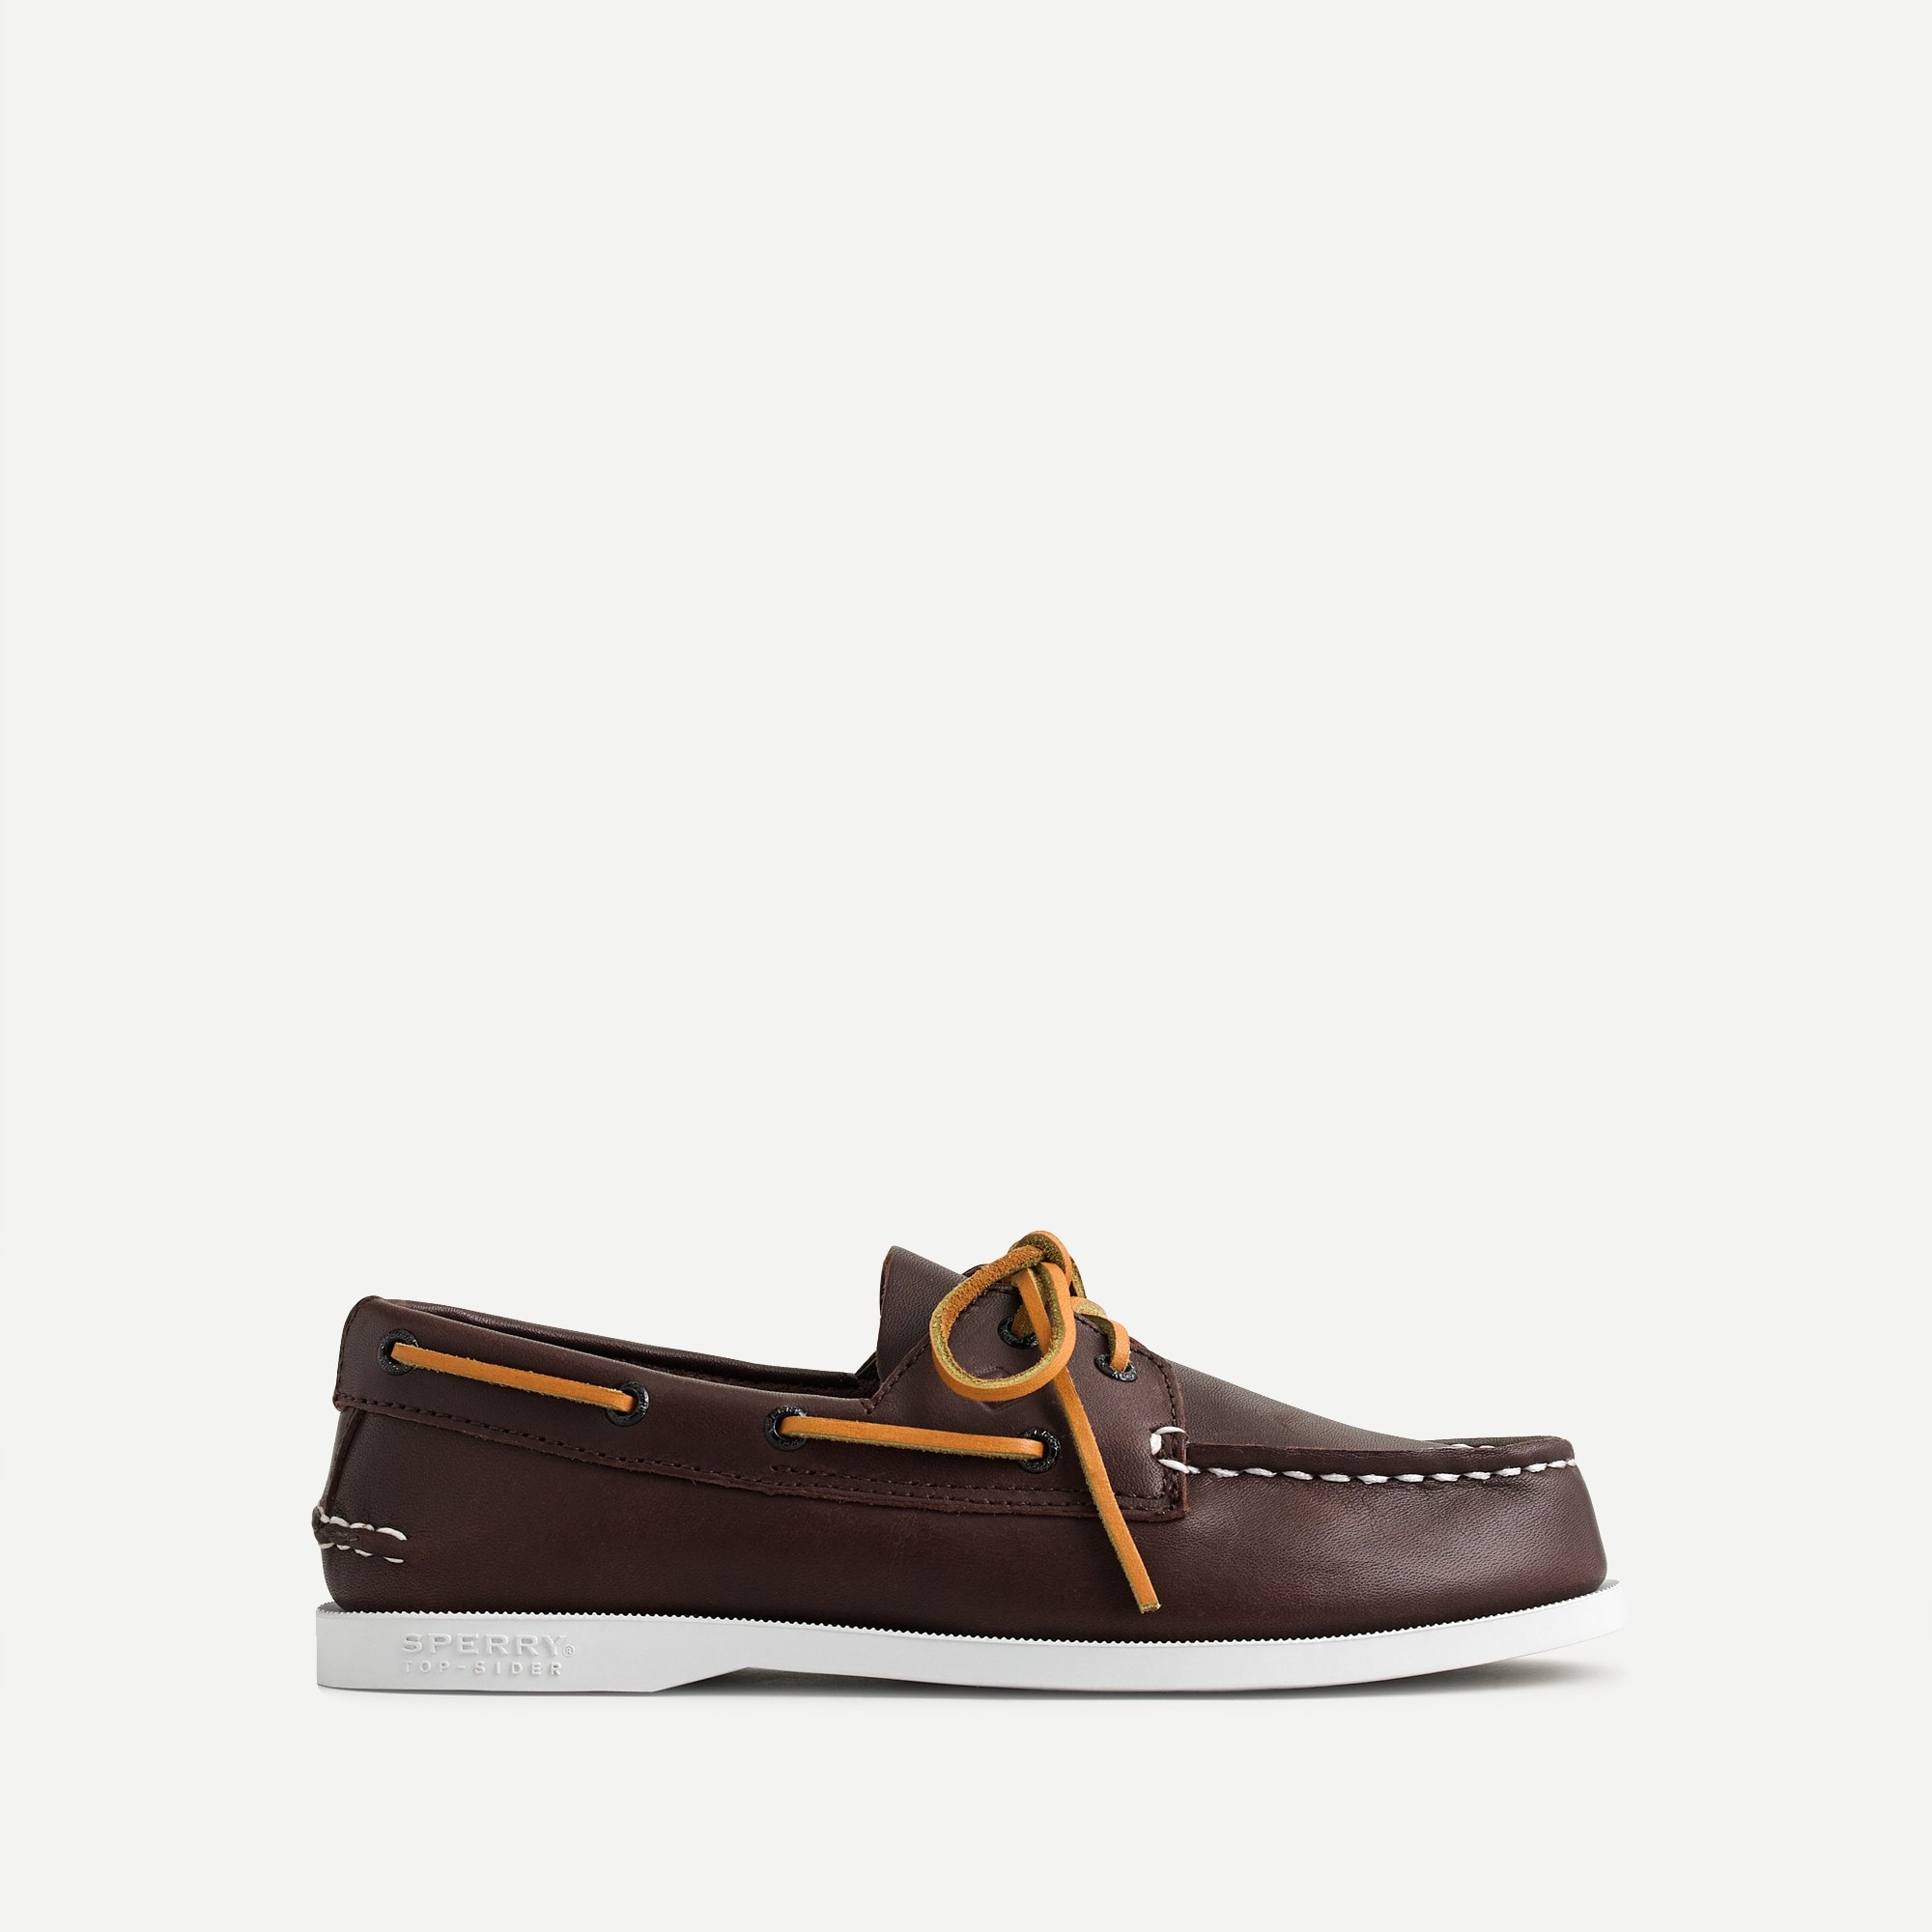 baby sperry boat shoes